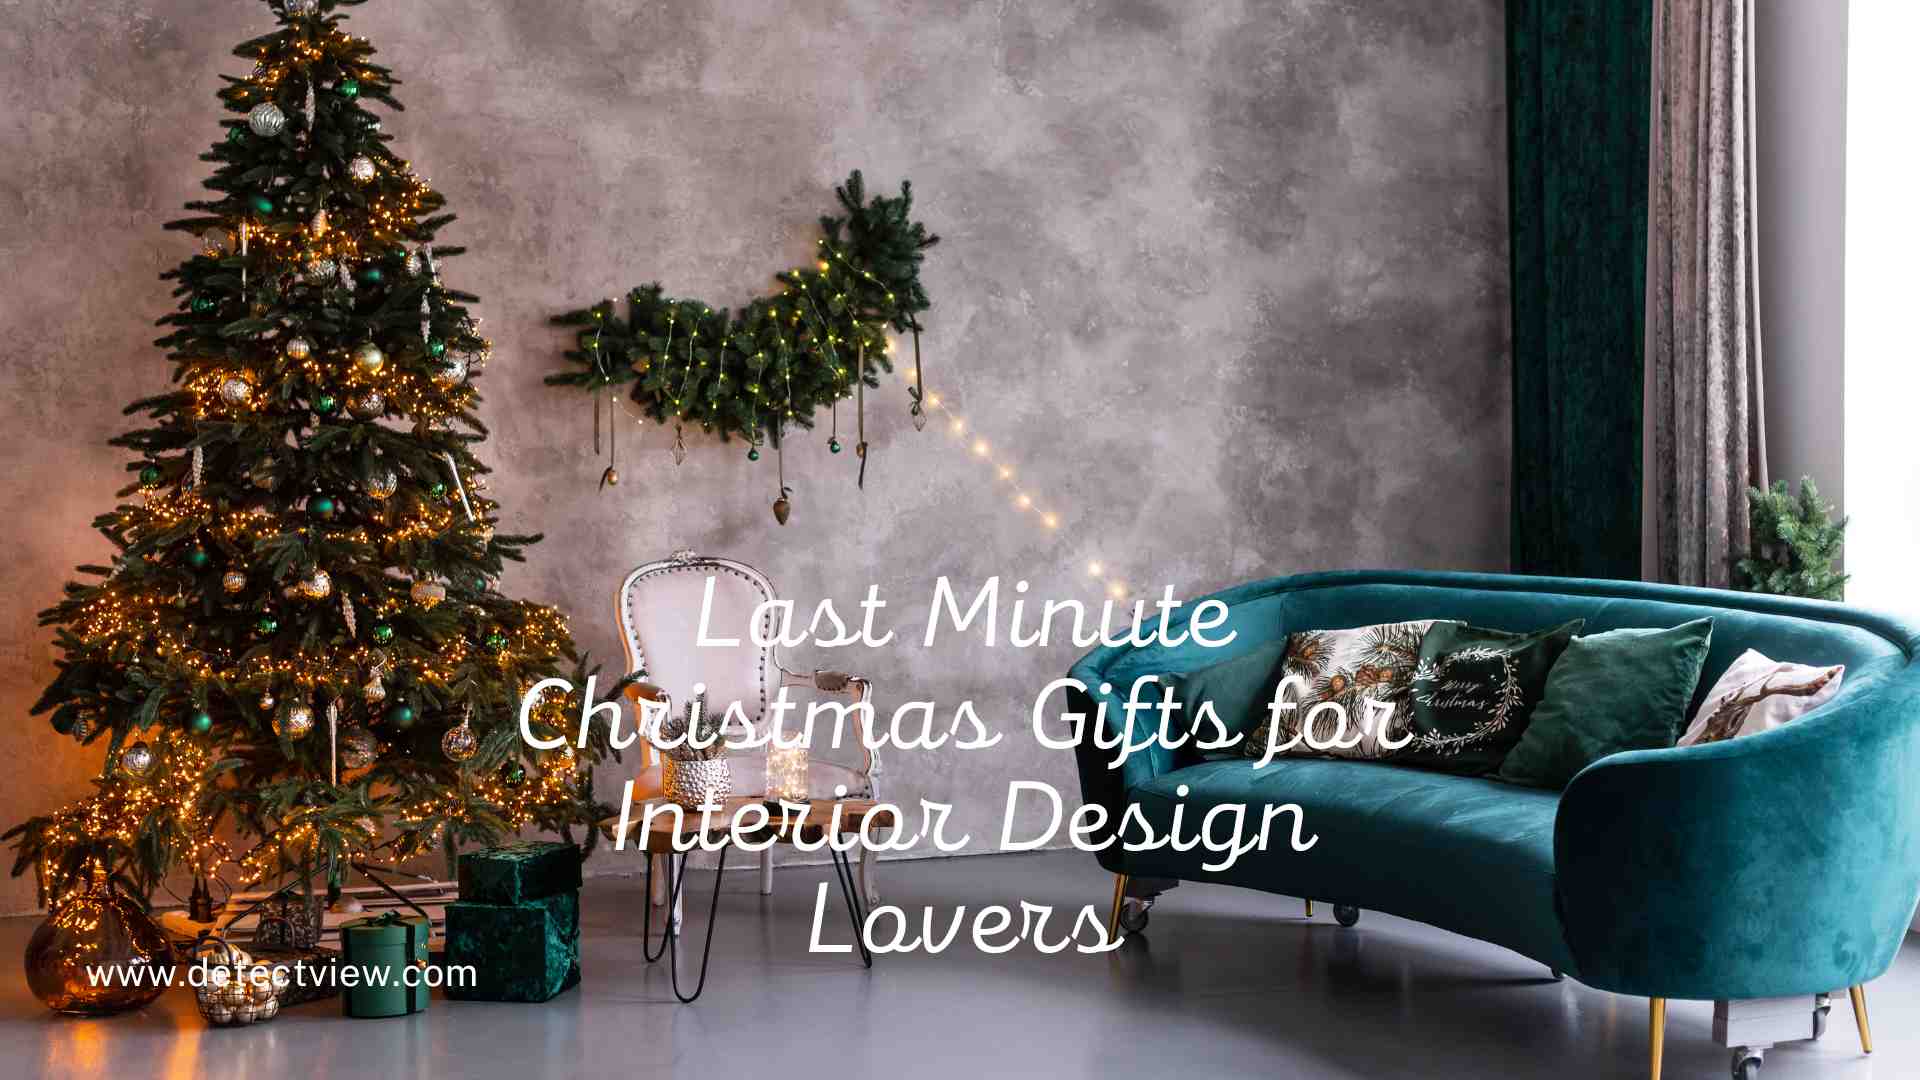 Last Minute Christmas Gifts for Interior Design Lovers